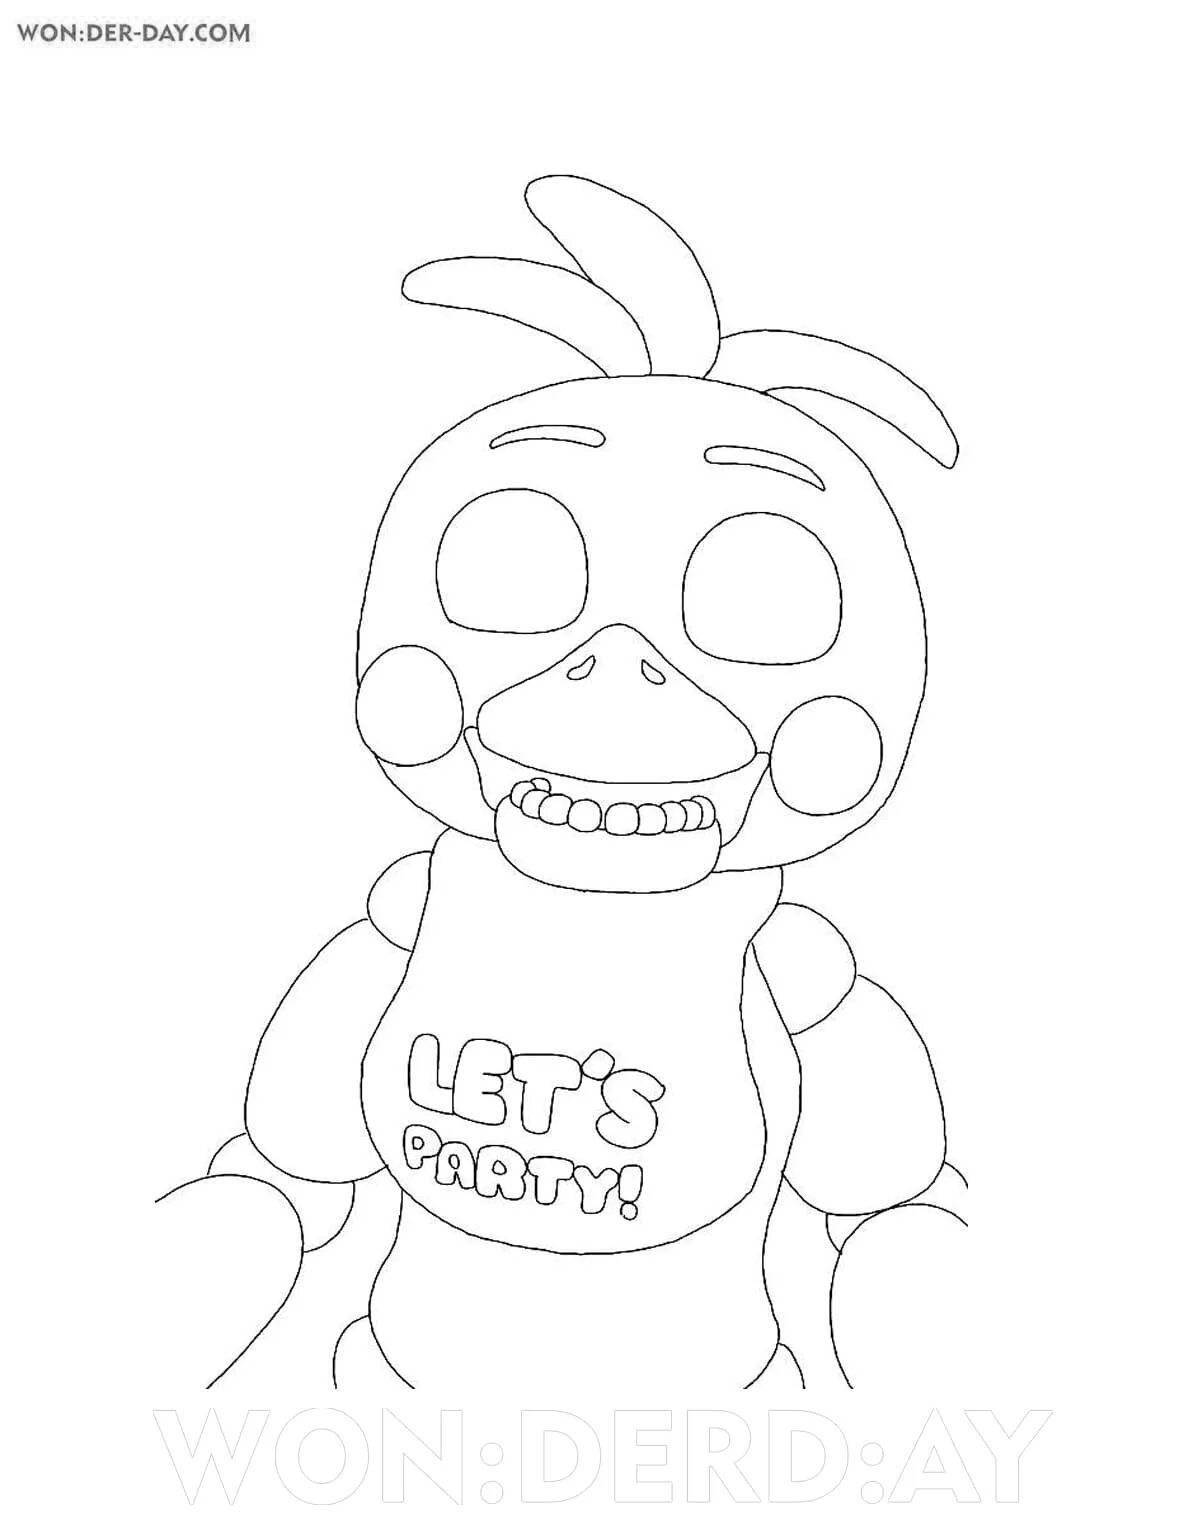 Dazzling coloring page of that fnaf chick